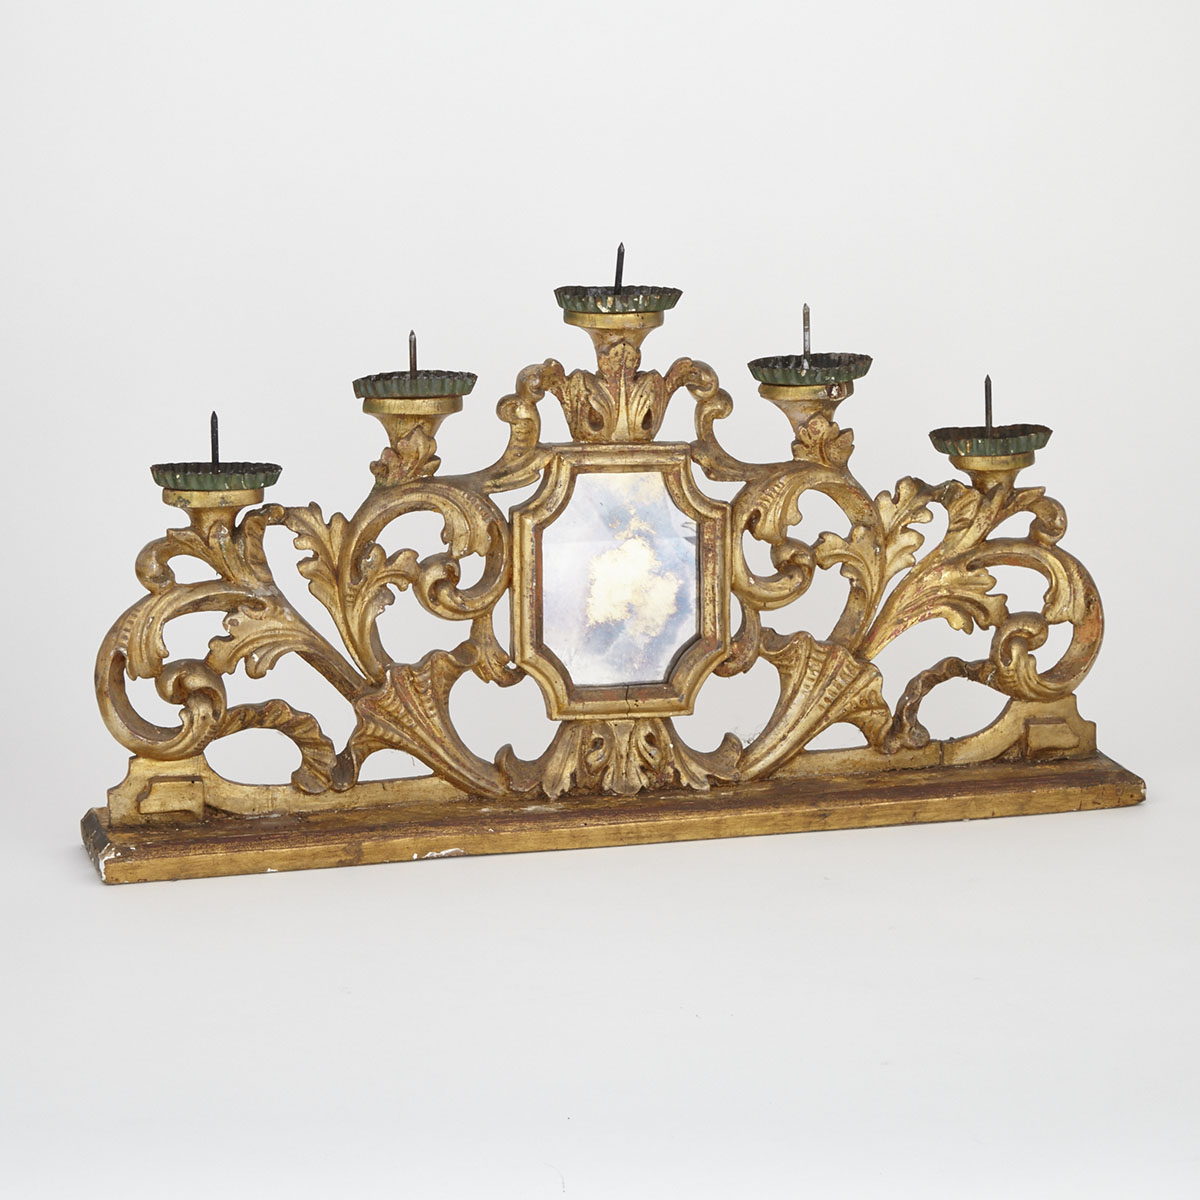 Florentine Rococo Style Carved Giltwood Five Pricket Candle Stand,19th century